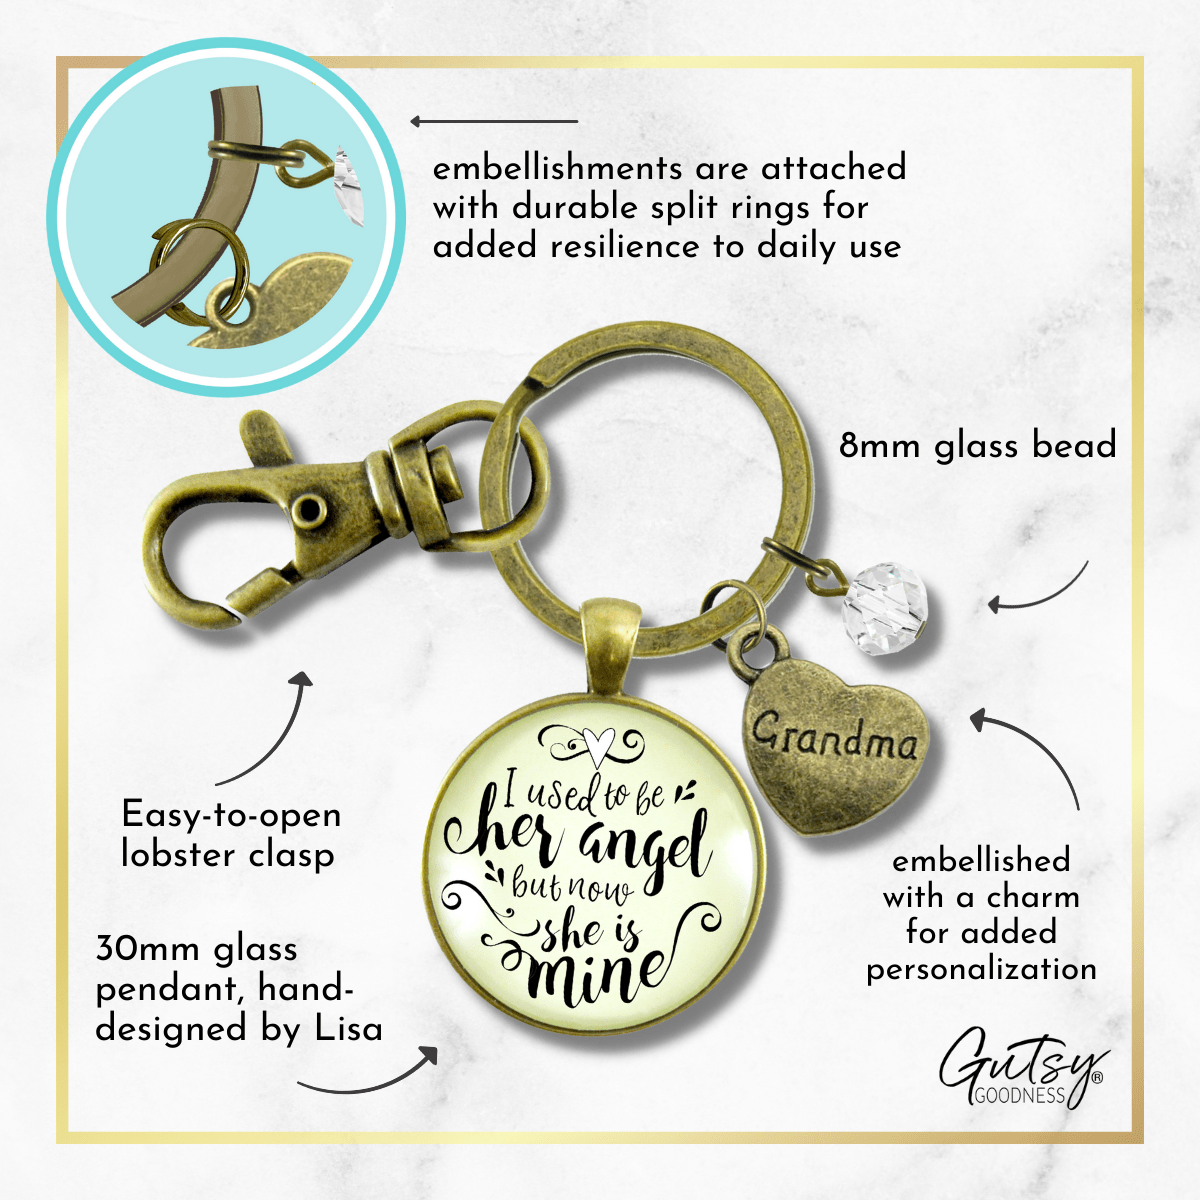 Grandma Memorial Keychain I Used to Be Her Angel Now She's Mine Sympathy Gift - Gutsy Goodness Handmade Jewelry;Grandma Memorial Keychain I Used To Be Her Angel Now She's Mine Sympathy Gift - Gutsy Goodness Handmade Jewelry Gifts